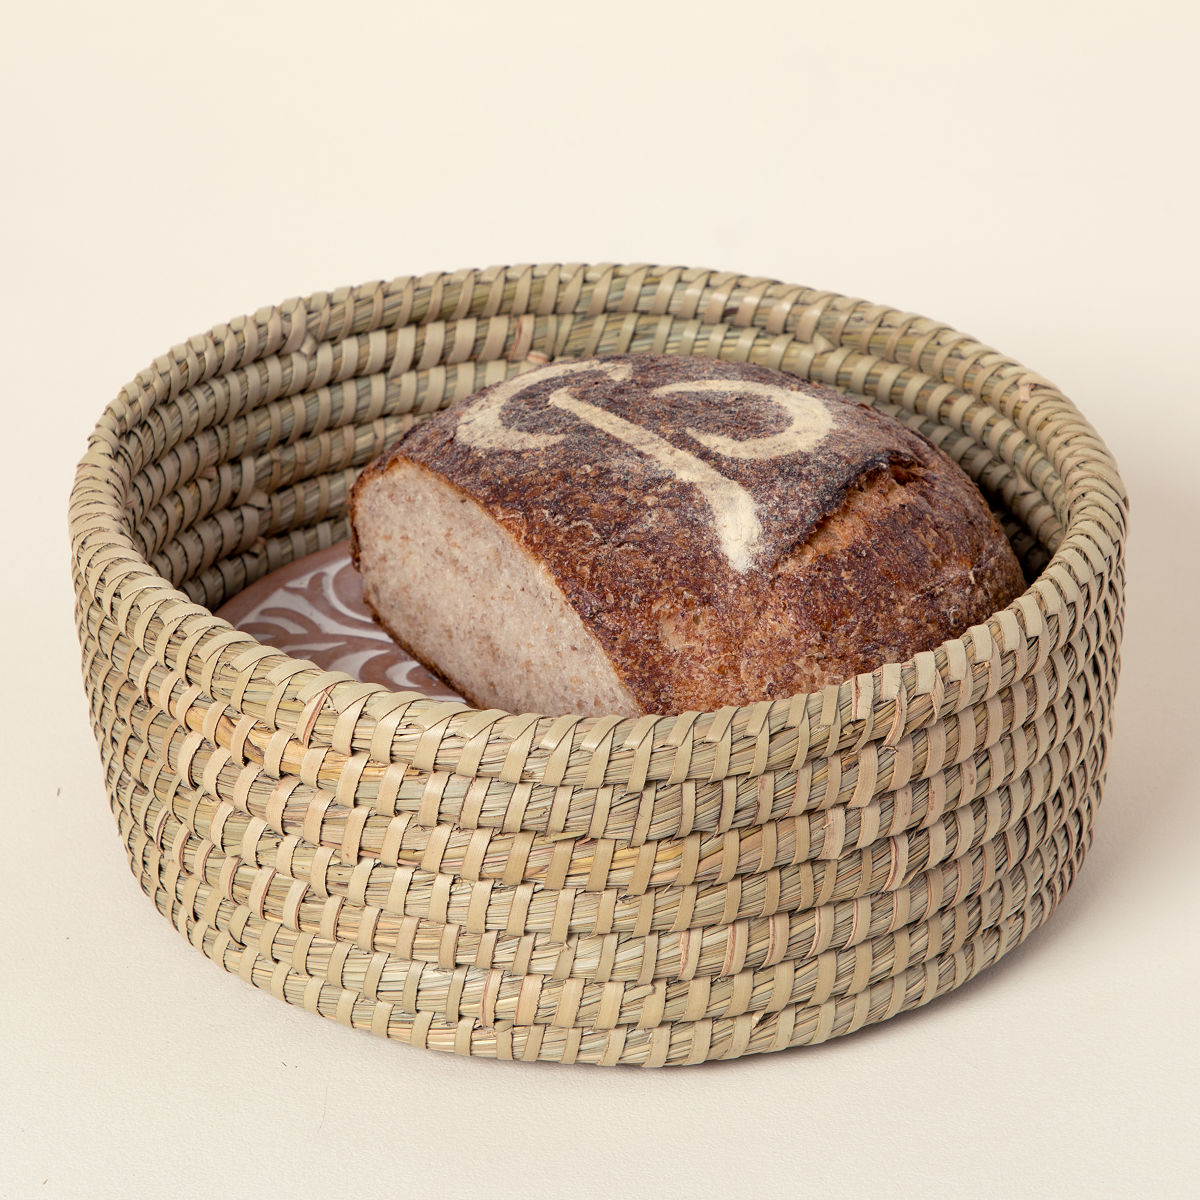 Without Lid - Traditional Bread Warming Set